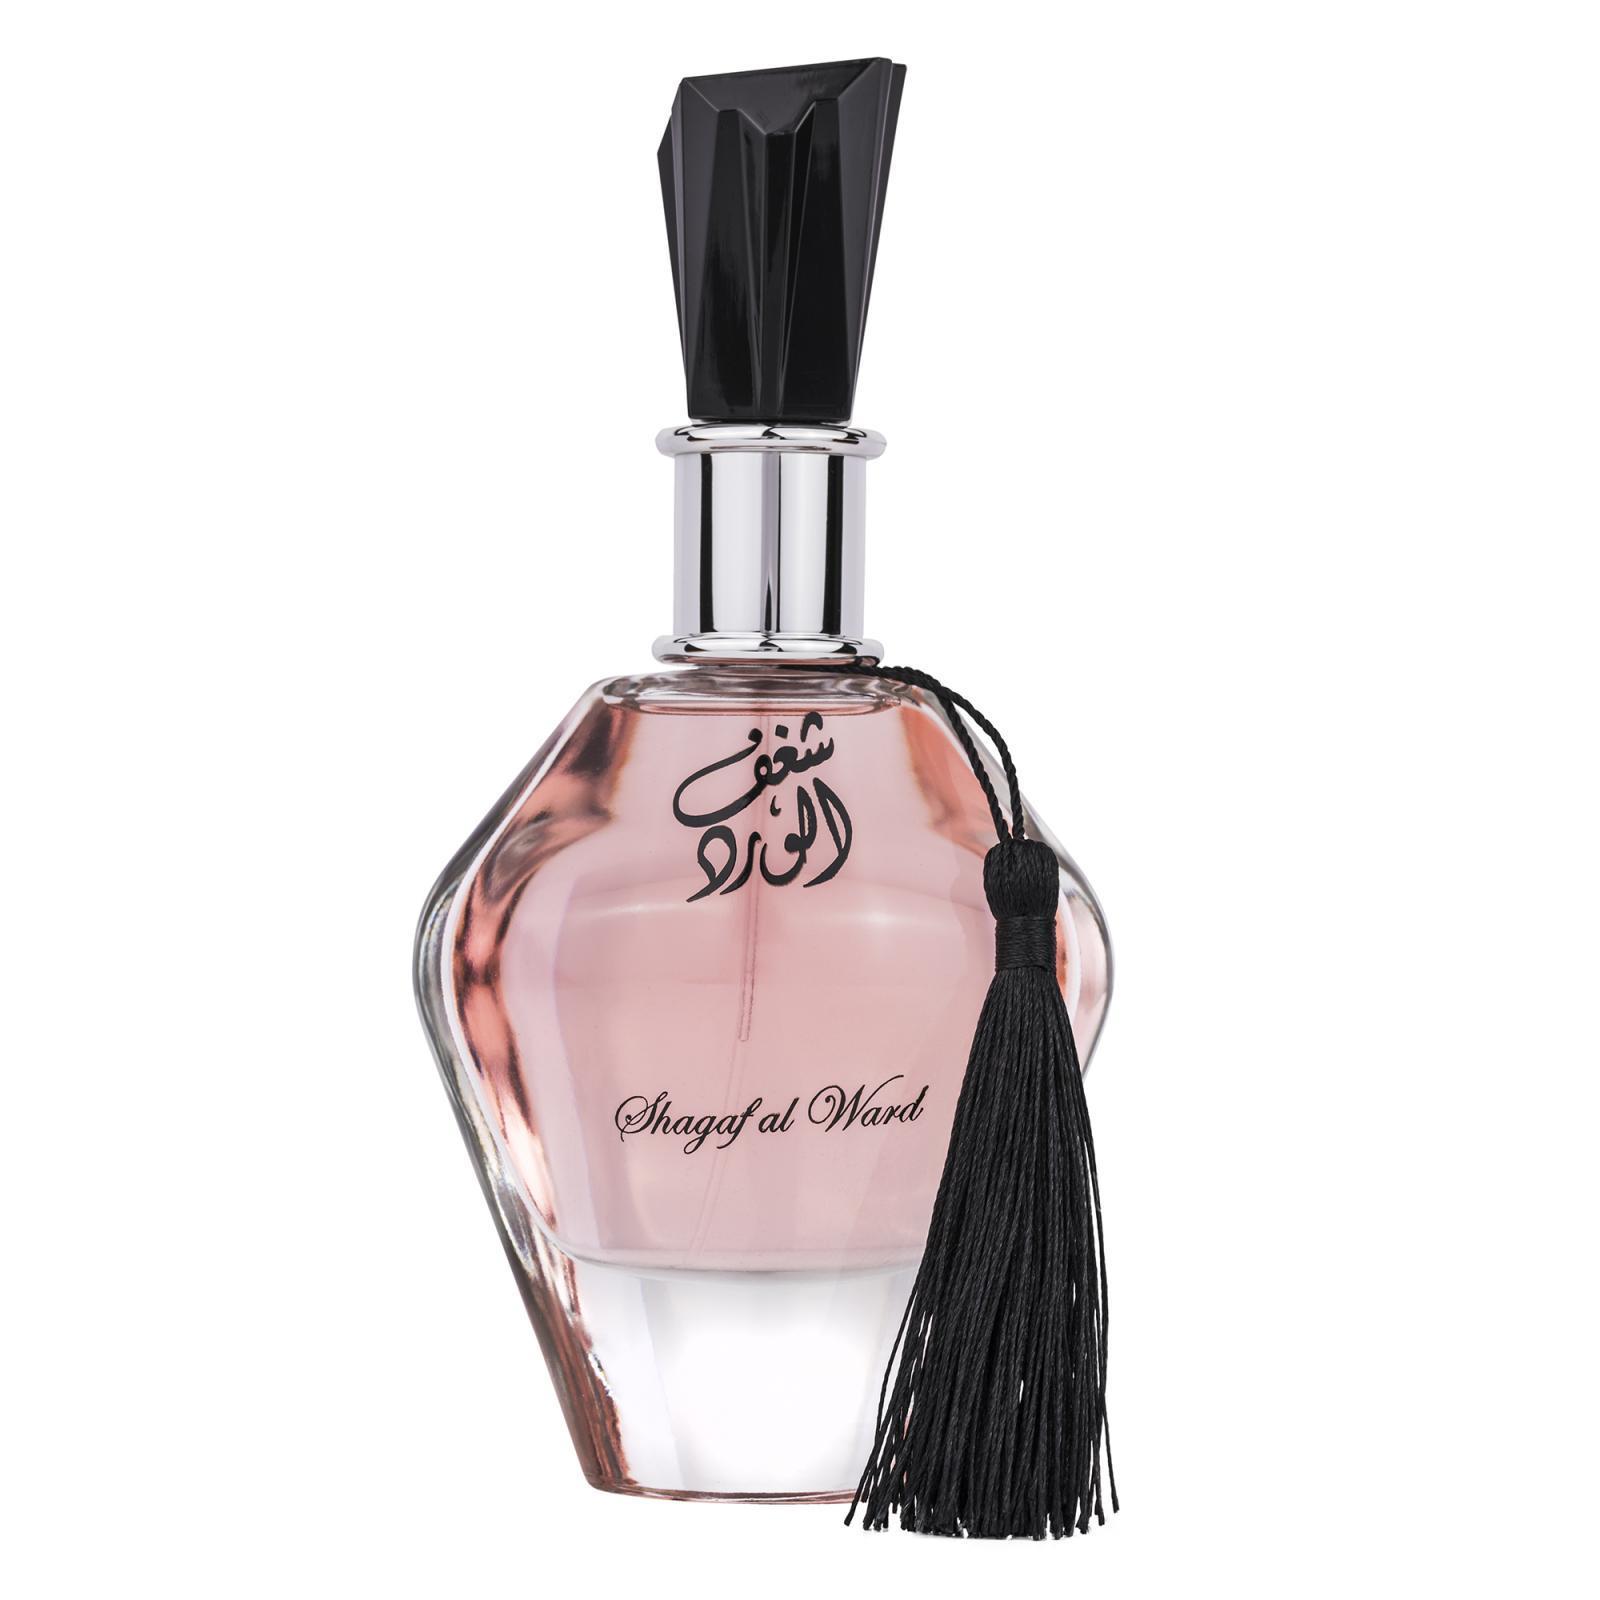 Parfum Arabesc Shagaf Al Ward Apa De Parfum 100 Ml Femei 555 8183 Shagaf Al Ward Edp 100Ml By Al Wataniah Is A Stunning 100Ml Bottle, Topped With A Crystal-Like Cap And A Provocative Black Tassel. At First Spray, It’s A Sweet Fruity Floral Which Reminds Me Of A Cross Between Amouage’s ‘Blossom Love’ And ‘Love Tuberose’. Ultra-Feminine, Sweet Pink Florals With A Scoop Of Vanilla Ice Cream On The Side. Soghaat Gifts &Amp; Fragrances